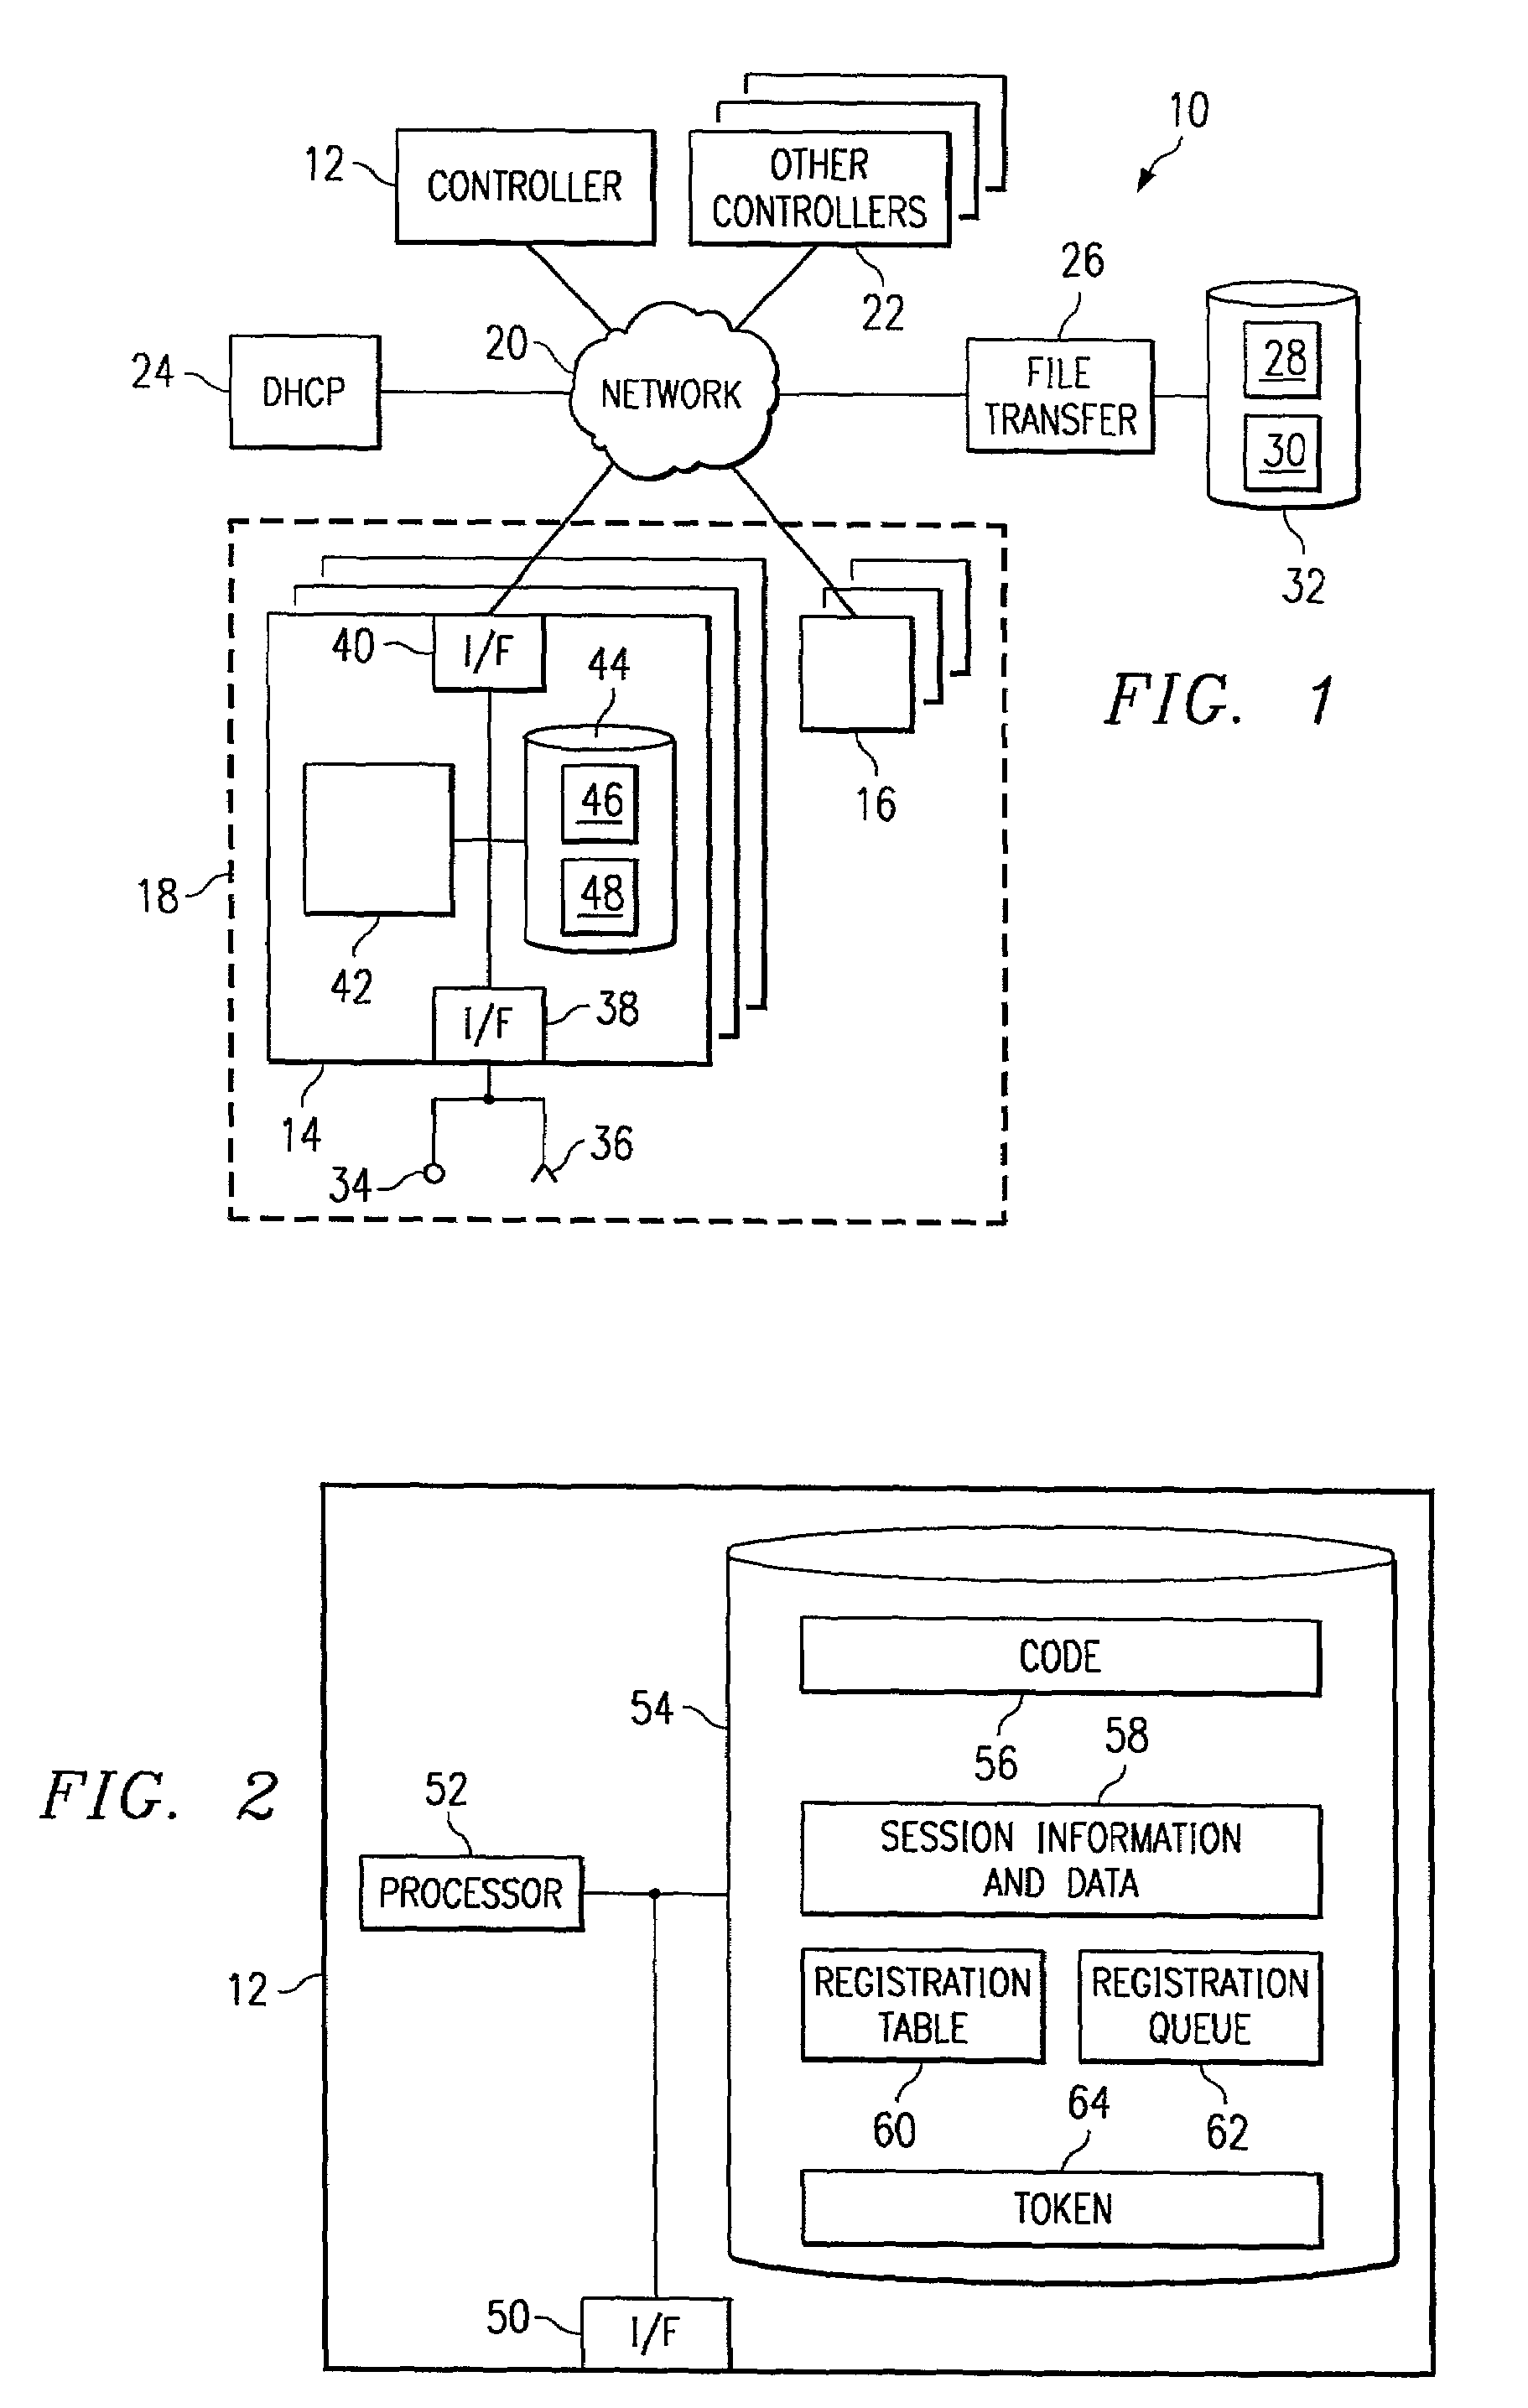 Token registration of managed devices